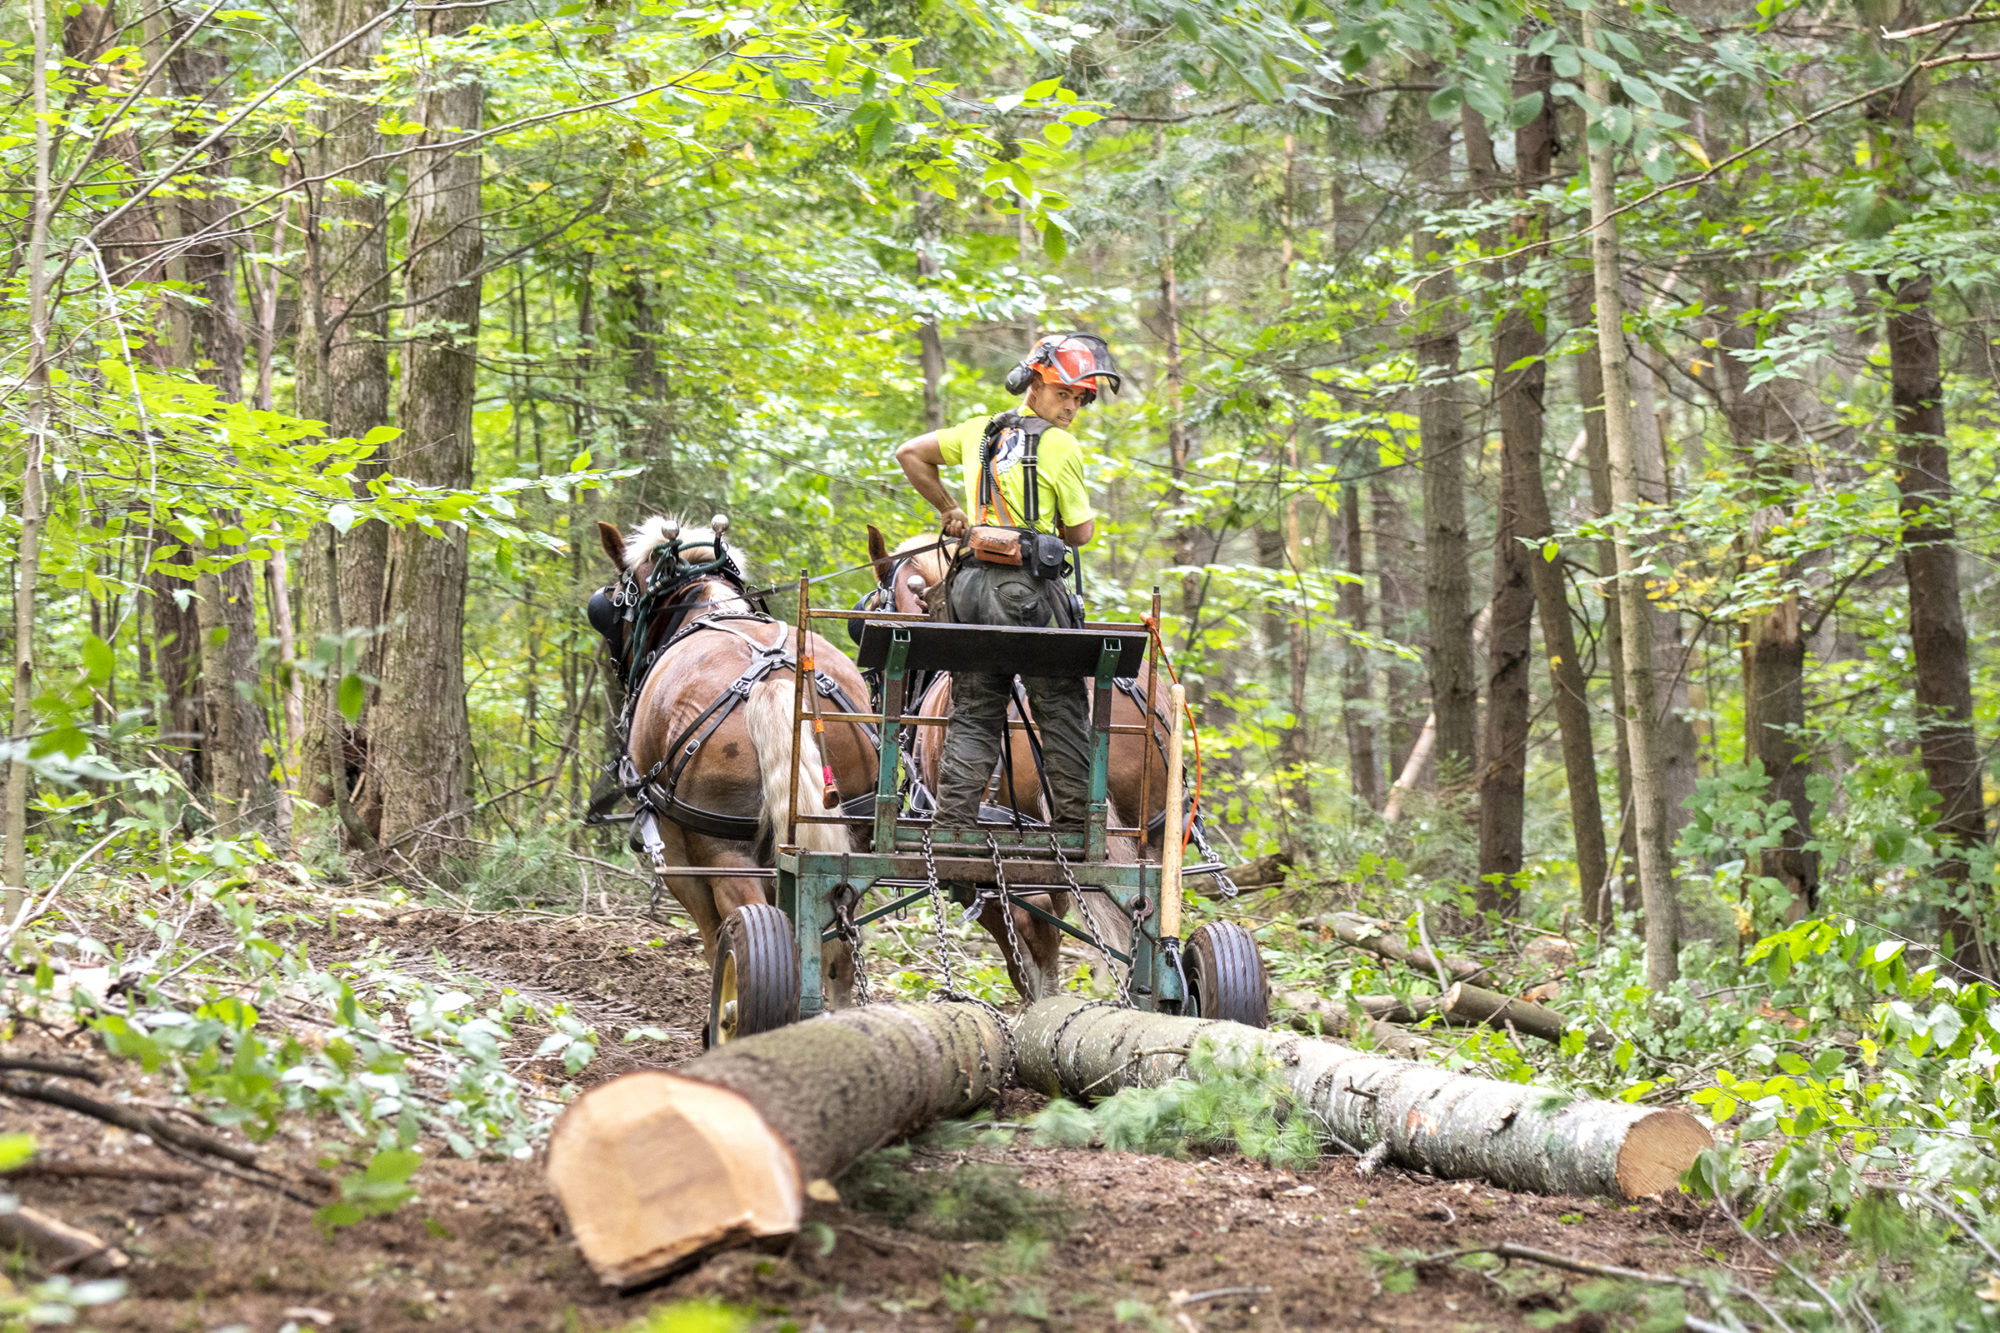 Derek O’Toole works in the woods with his horses in Northfield. Photo by Erica Houskeeper.